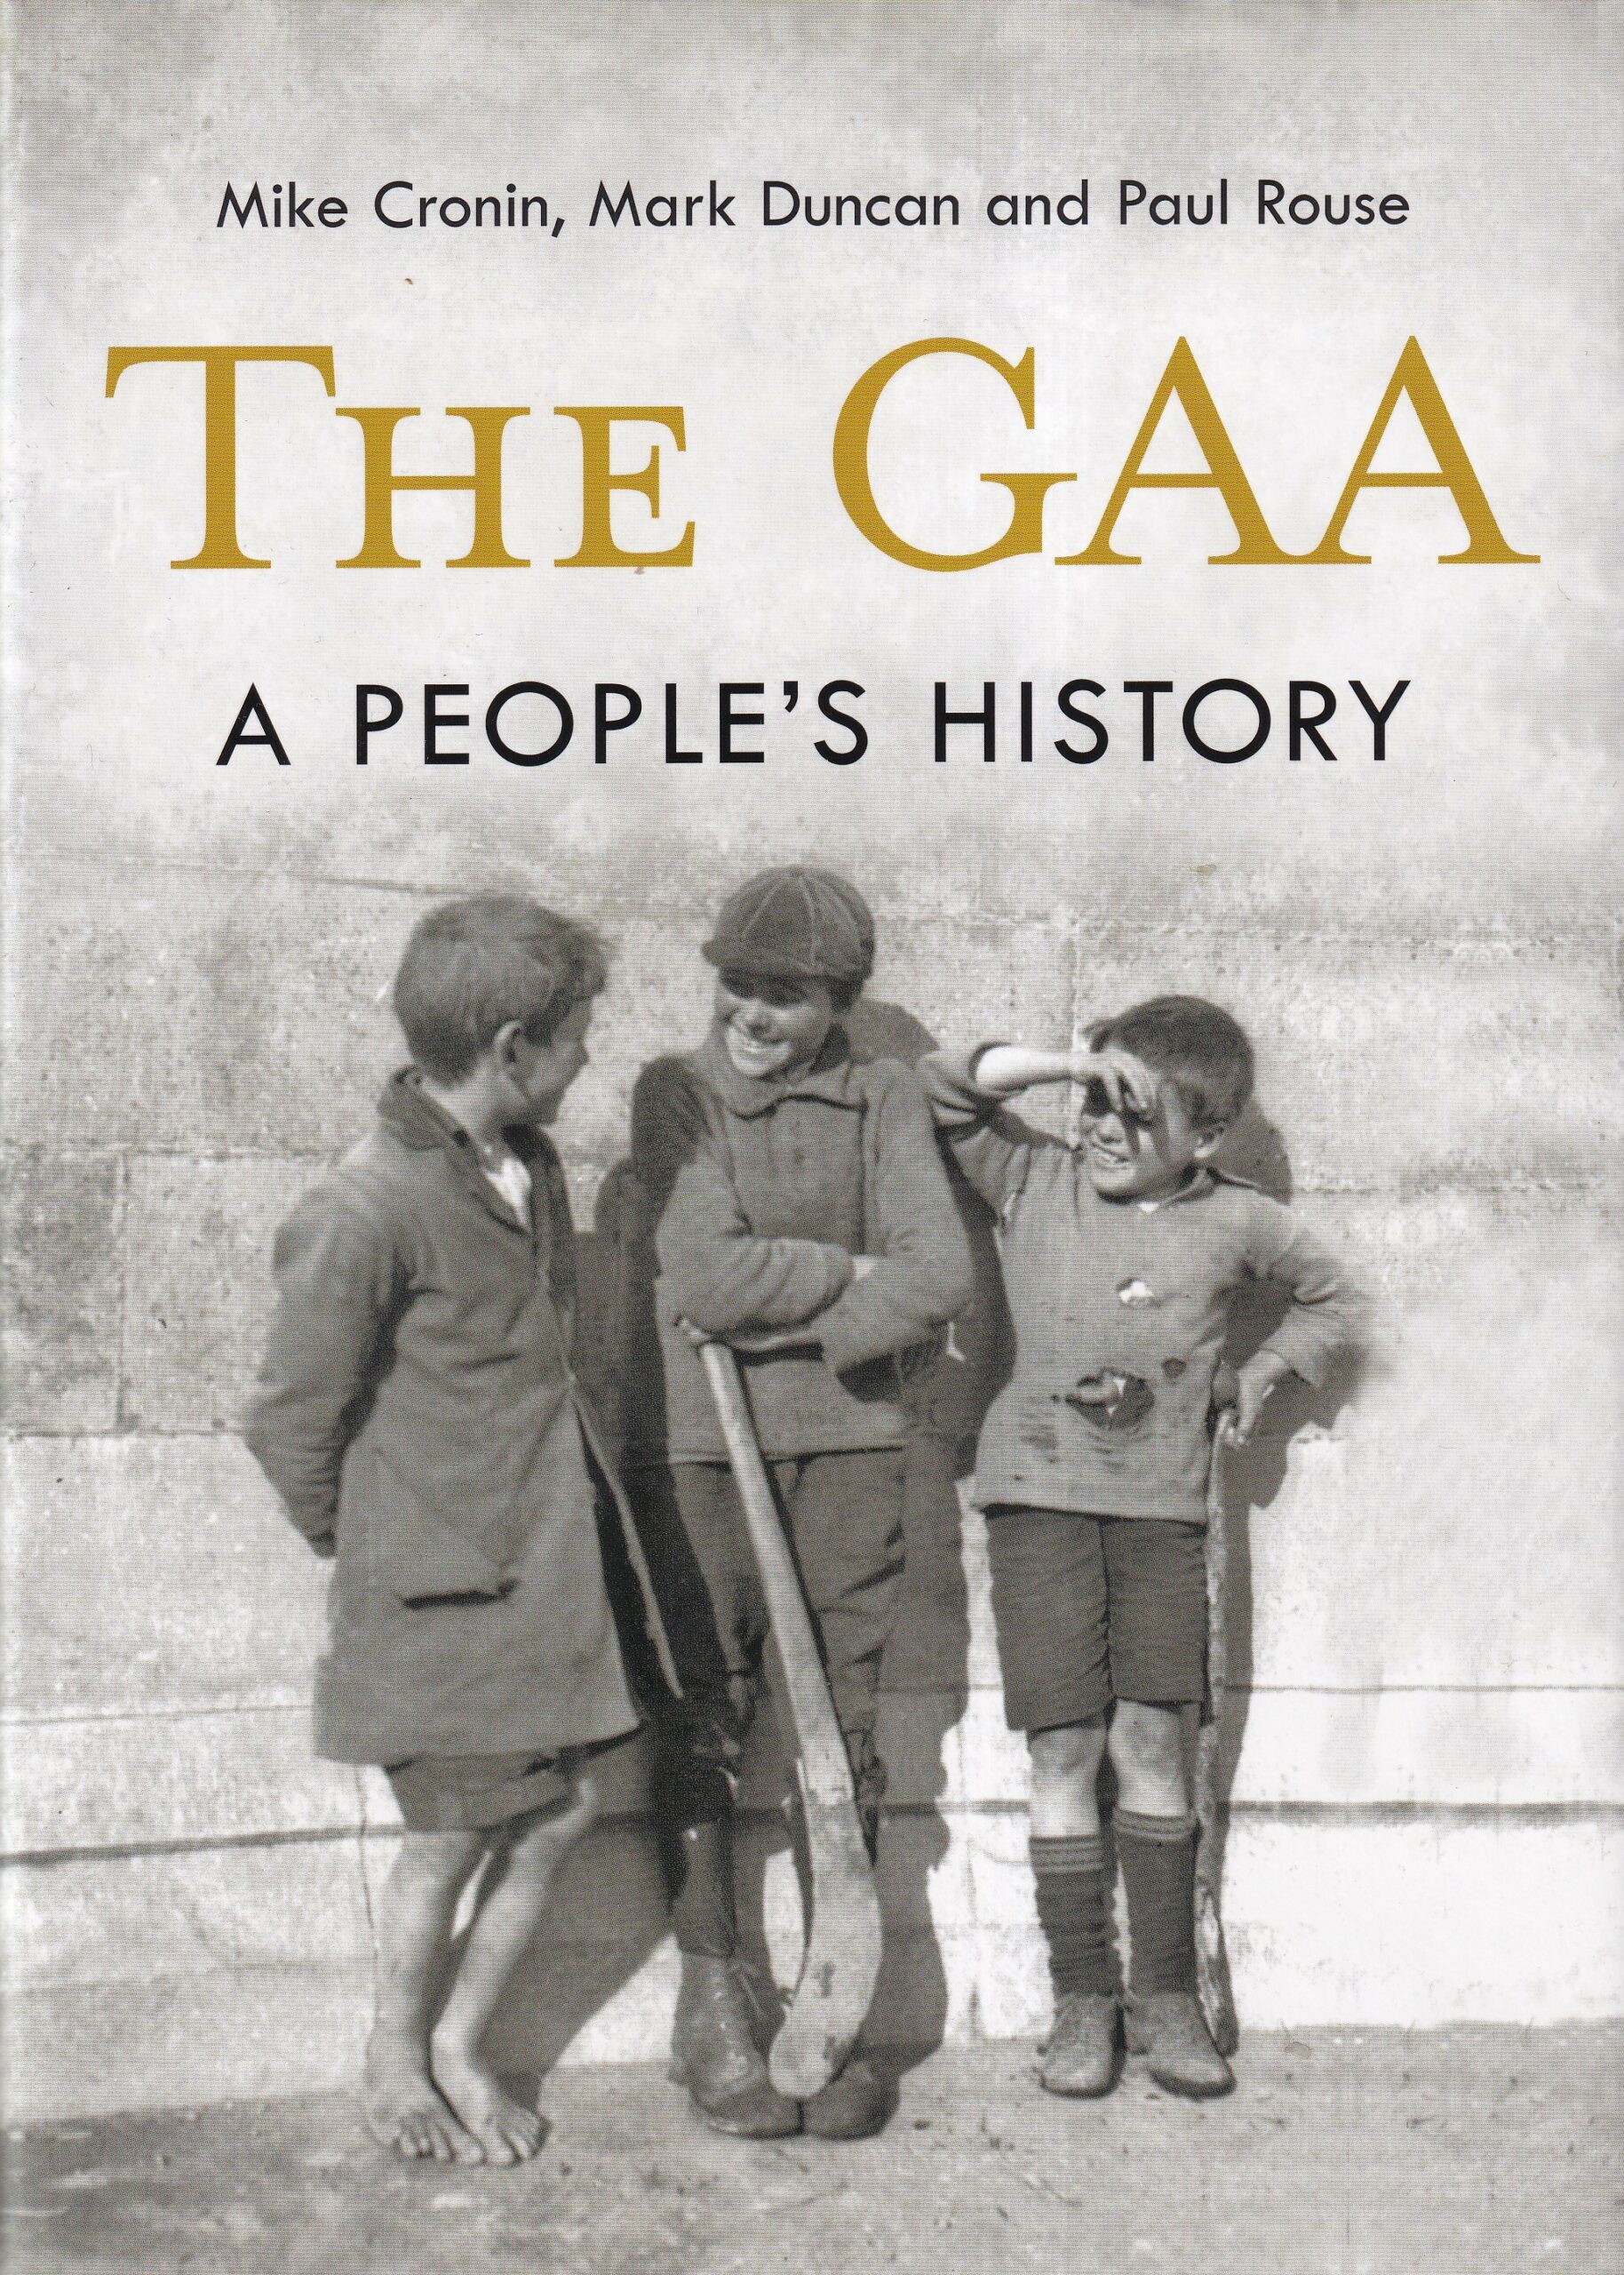 The GAA: A People’s History by Mike Cronin, Mark Duncan and Paul Rouse